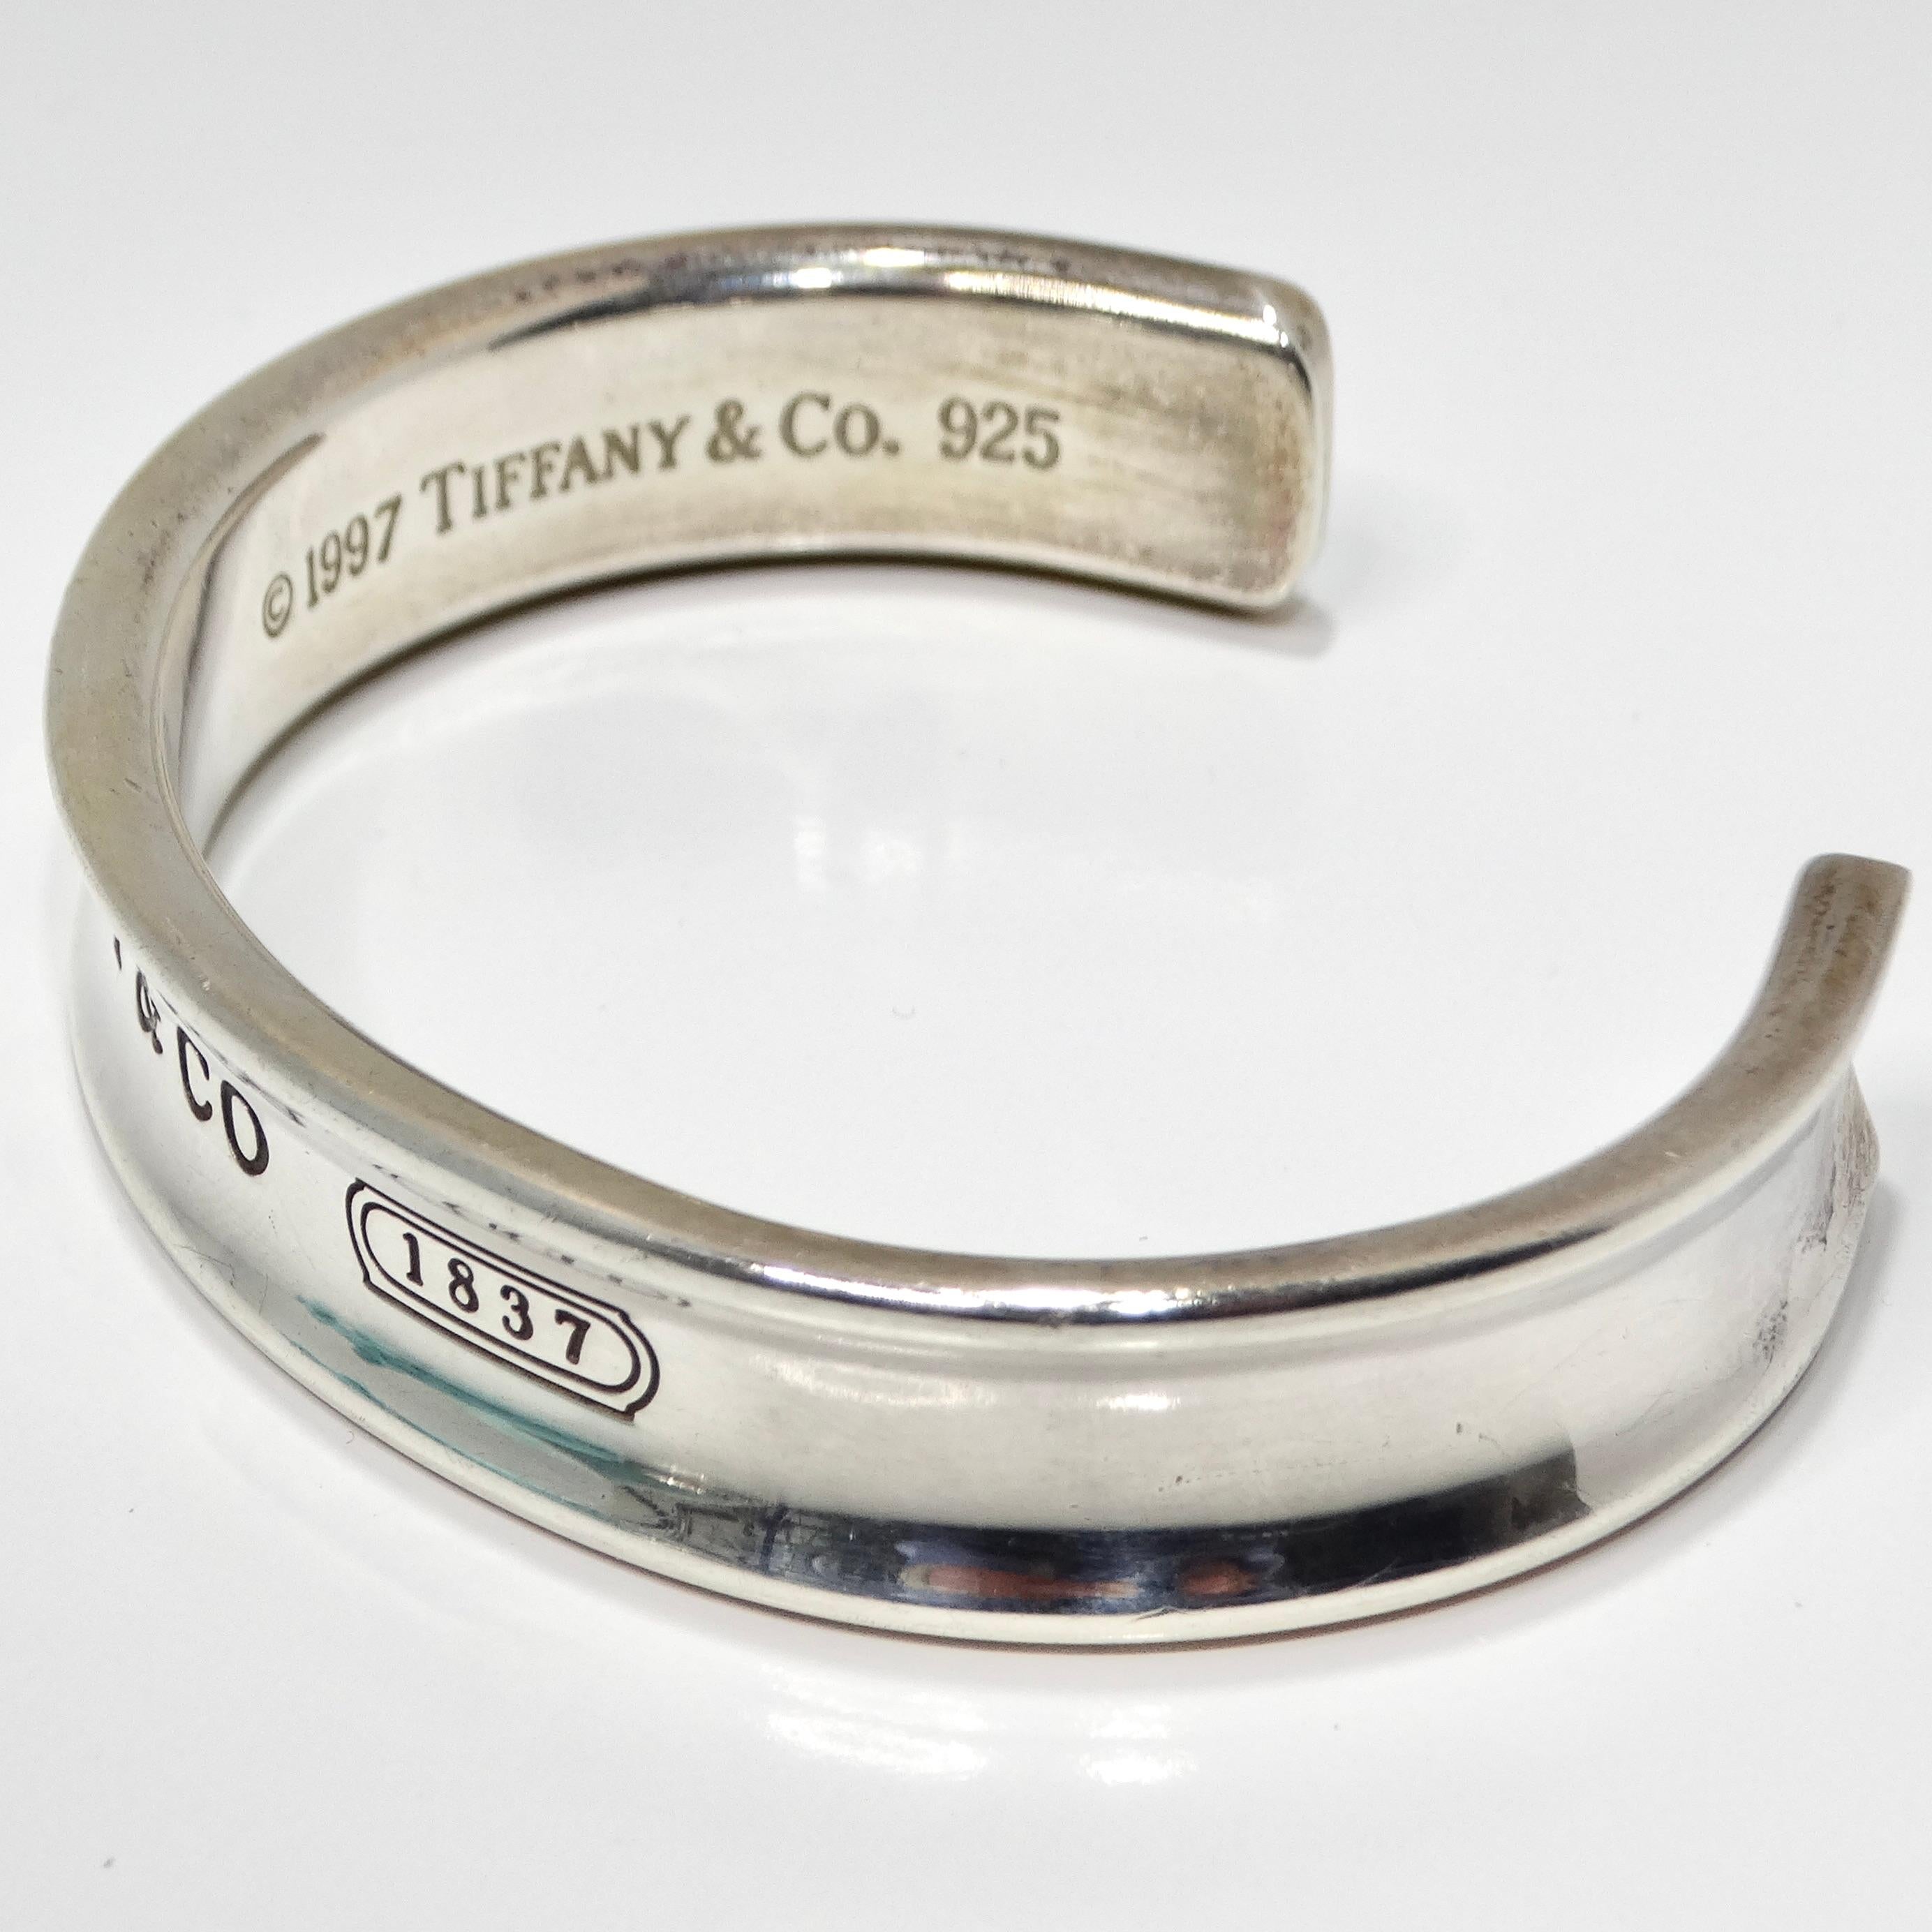 Tiffany & Co 1997 Silver 1925 Engraved Cuff Bracelet For Sale 3